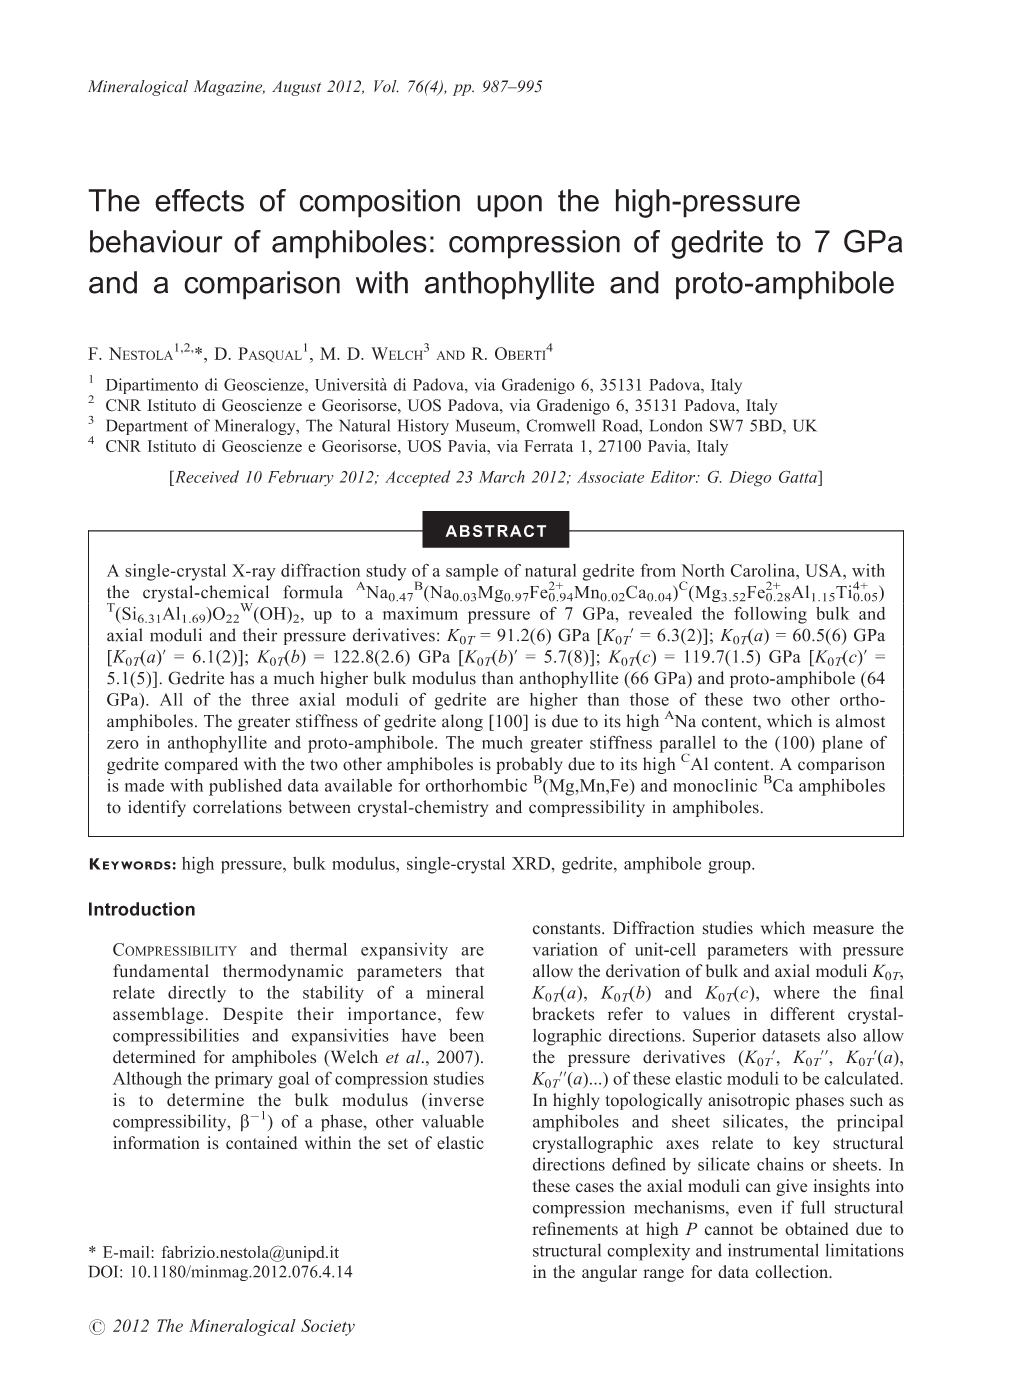 The Effects of Composition Upon the High-Pressure Behaviour of Amphiboles: Compression of Gedrite to 7 Gpa and a Comparison with Anthophyllite and Proto-Amphibole